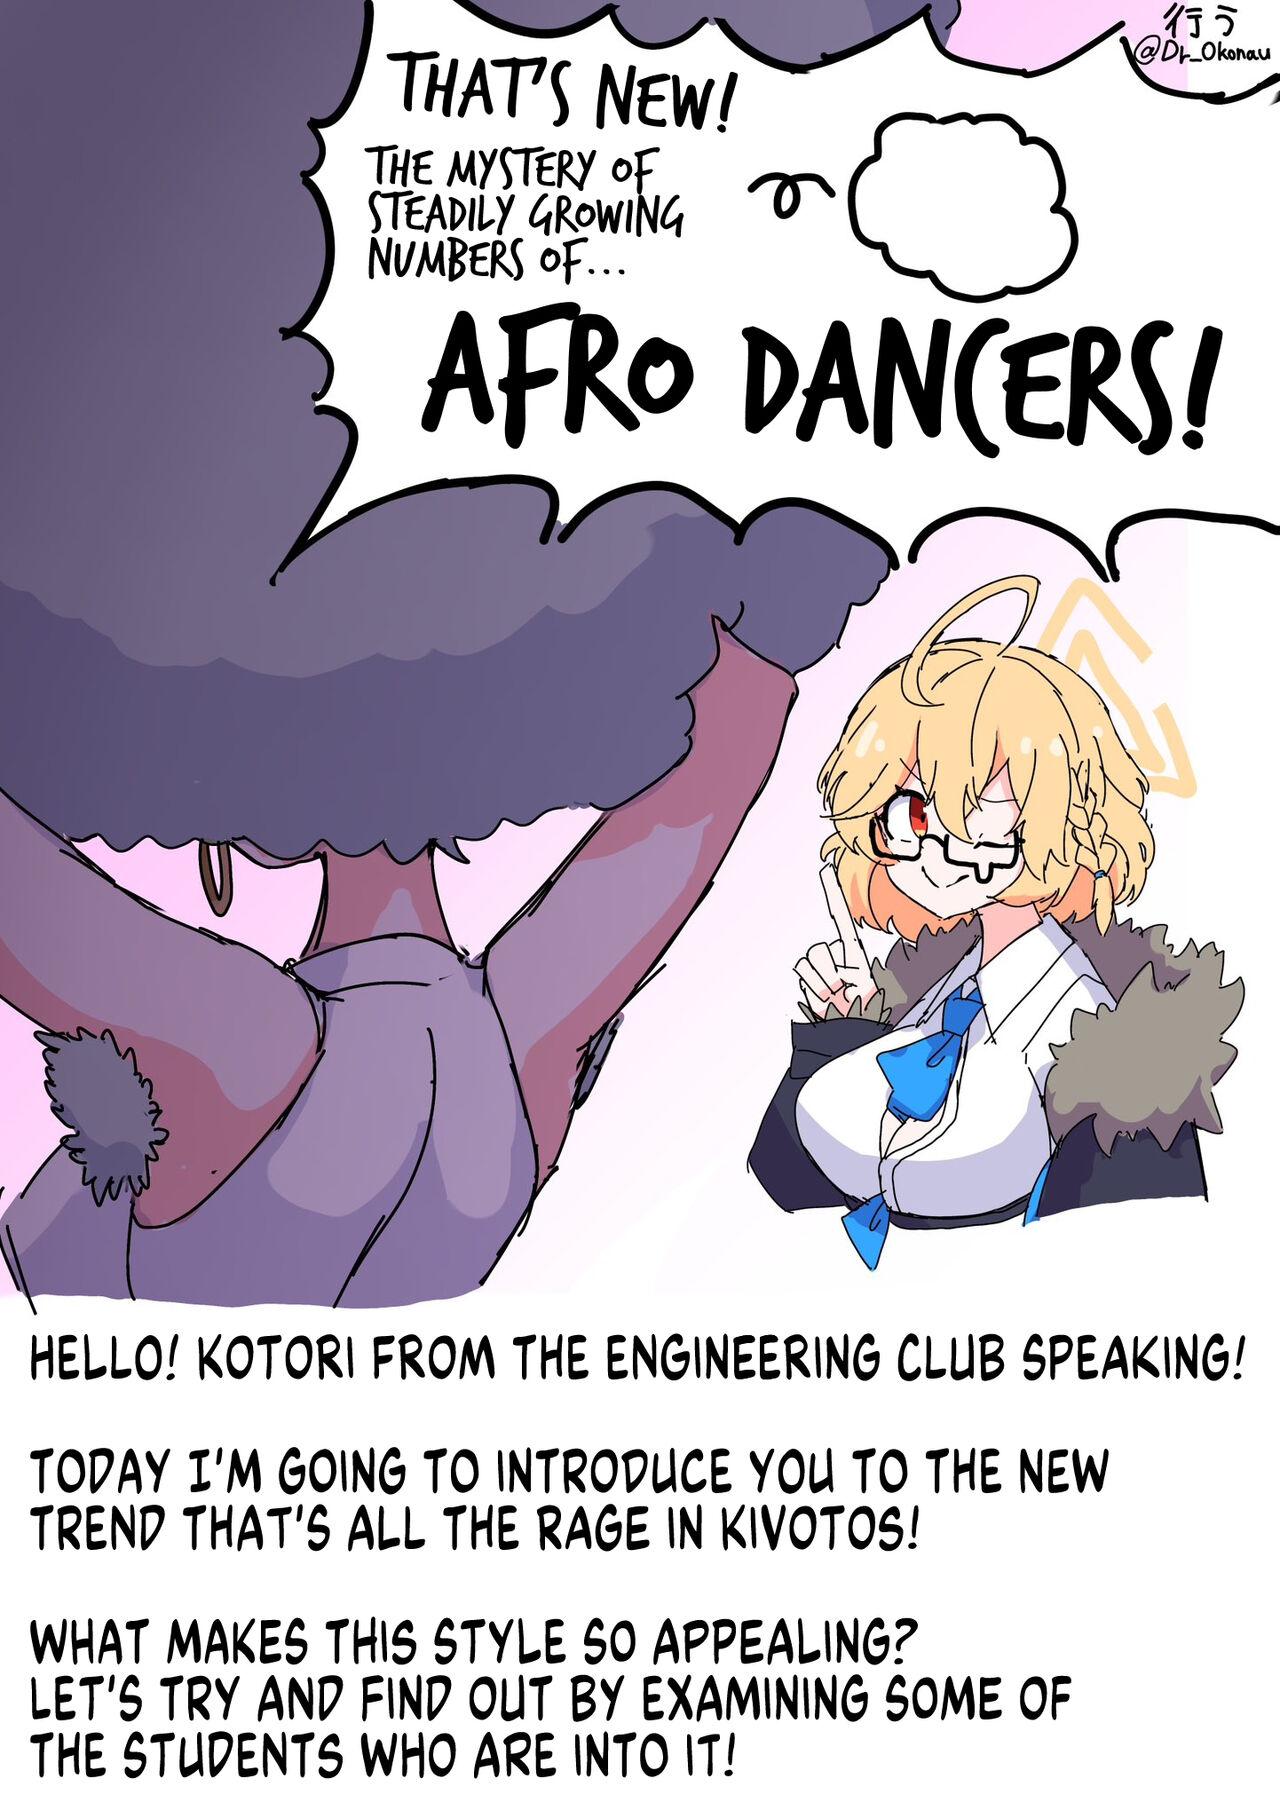 That's New! The Mystery of Steadily Growing Numbers of Afro Dancers! 0